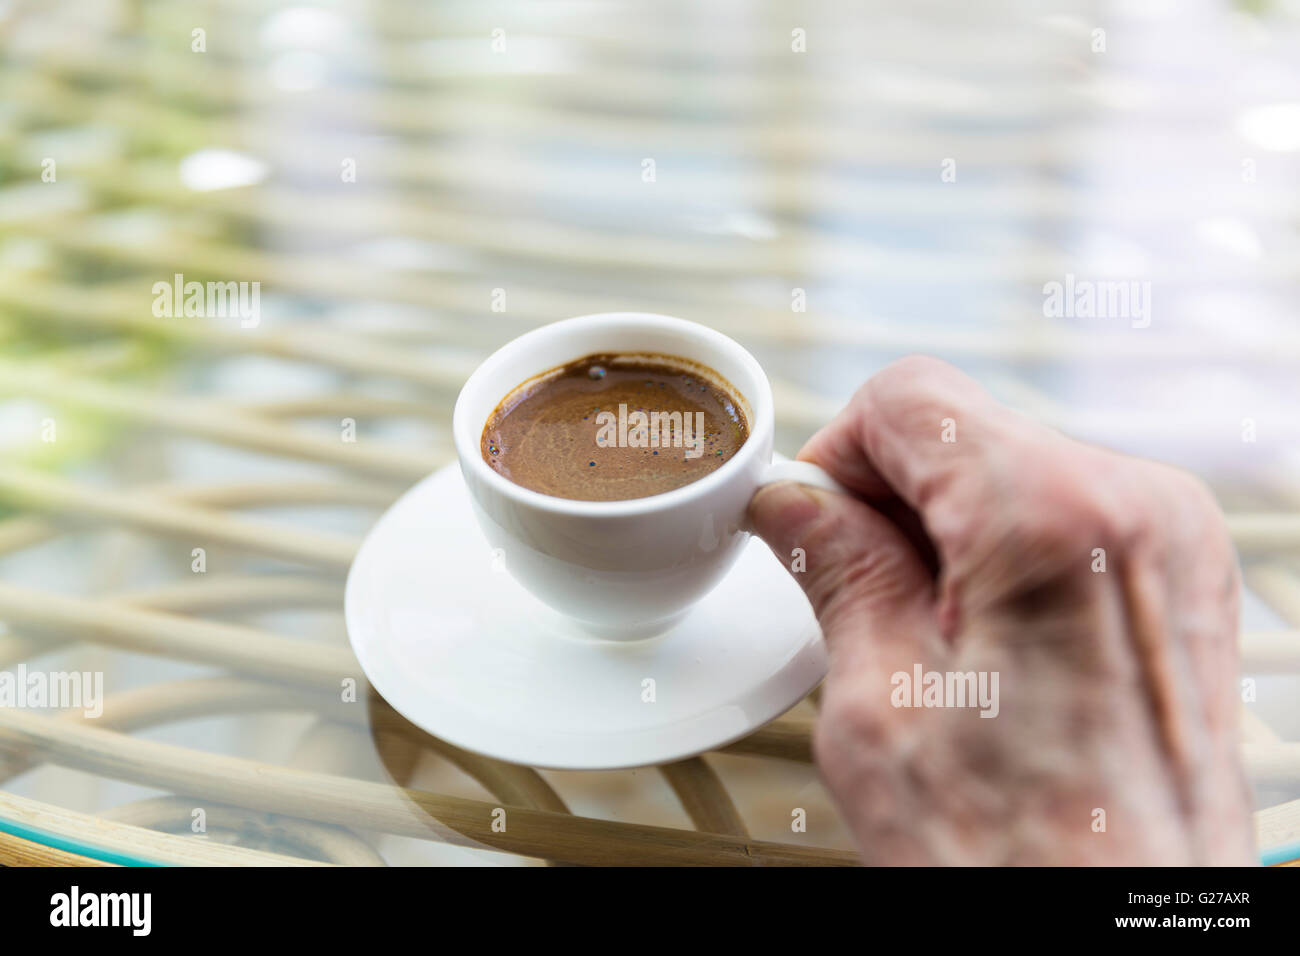 Senior Turkish woman hand holding a cup of Turkish coffee on a glass table Stock Photo